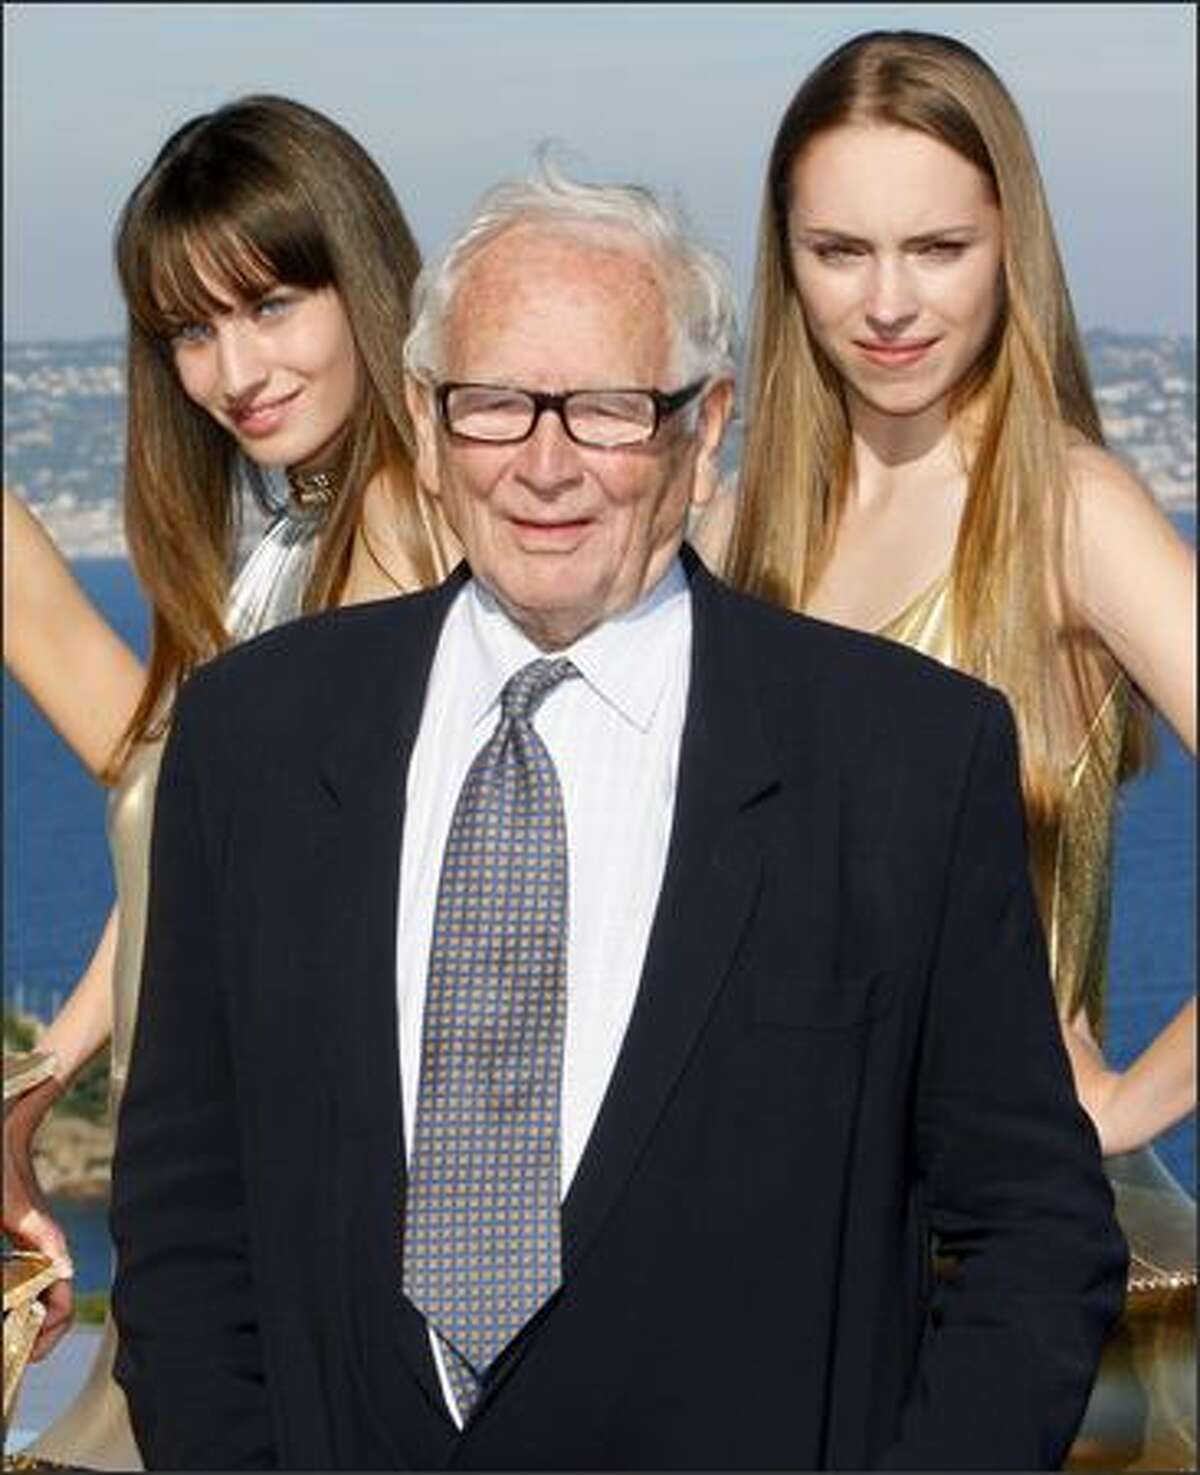 French designer Pierre Cardin poses with models after is spring/summer 2009 ready-to-wear collection show in Theoule-Sur-Mer, southern France, on Monday.